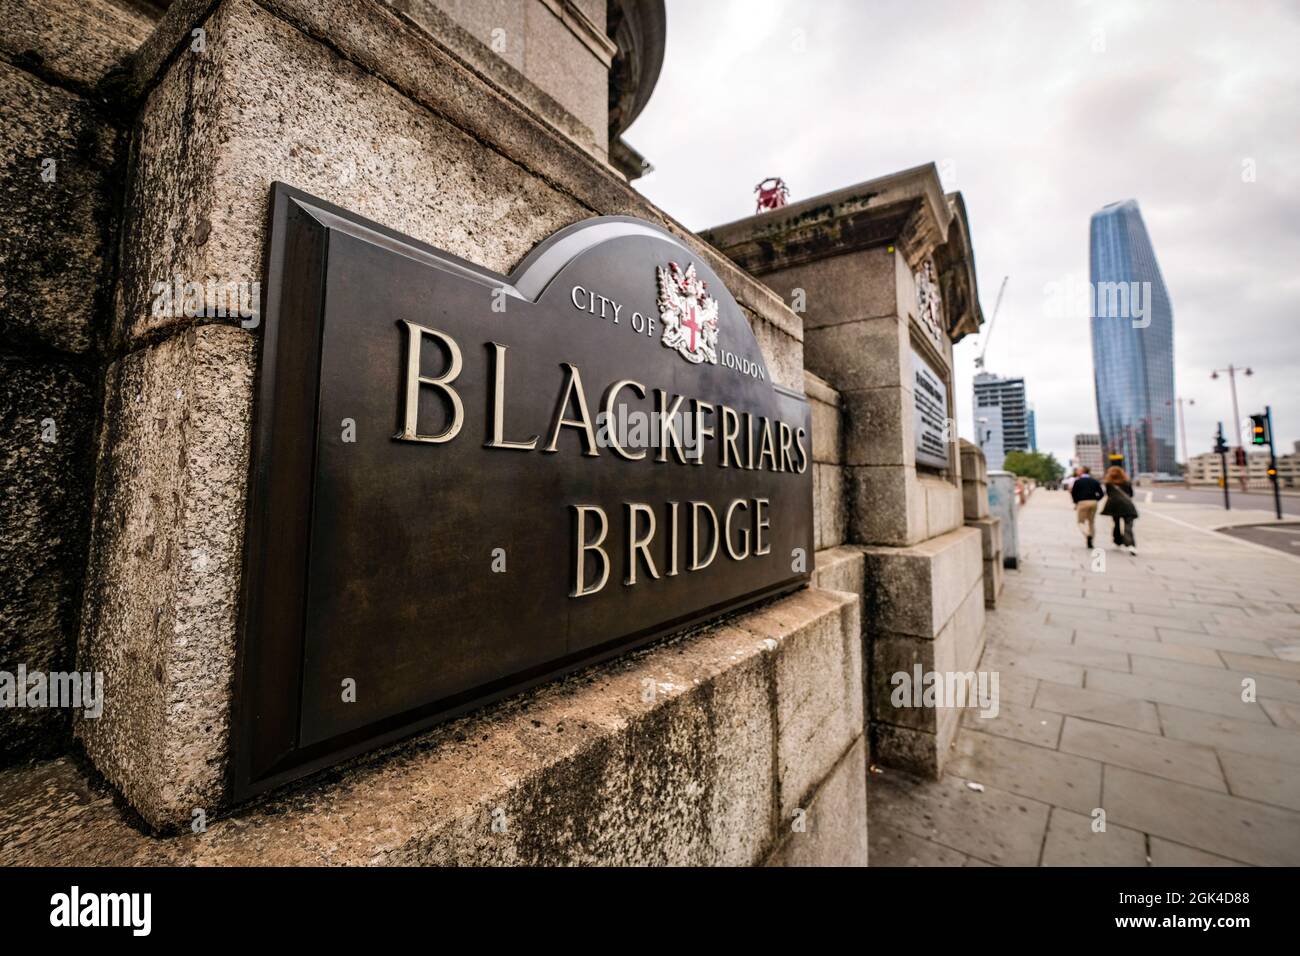 London, September, 2021: Blackfriars Bridge sign. A foot and road traffic bridge over the River Thames Stock Photo